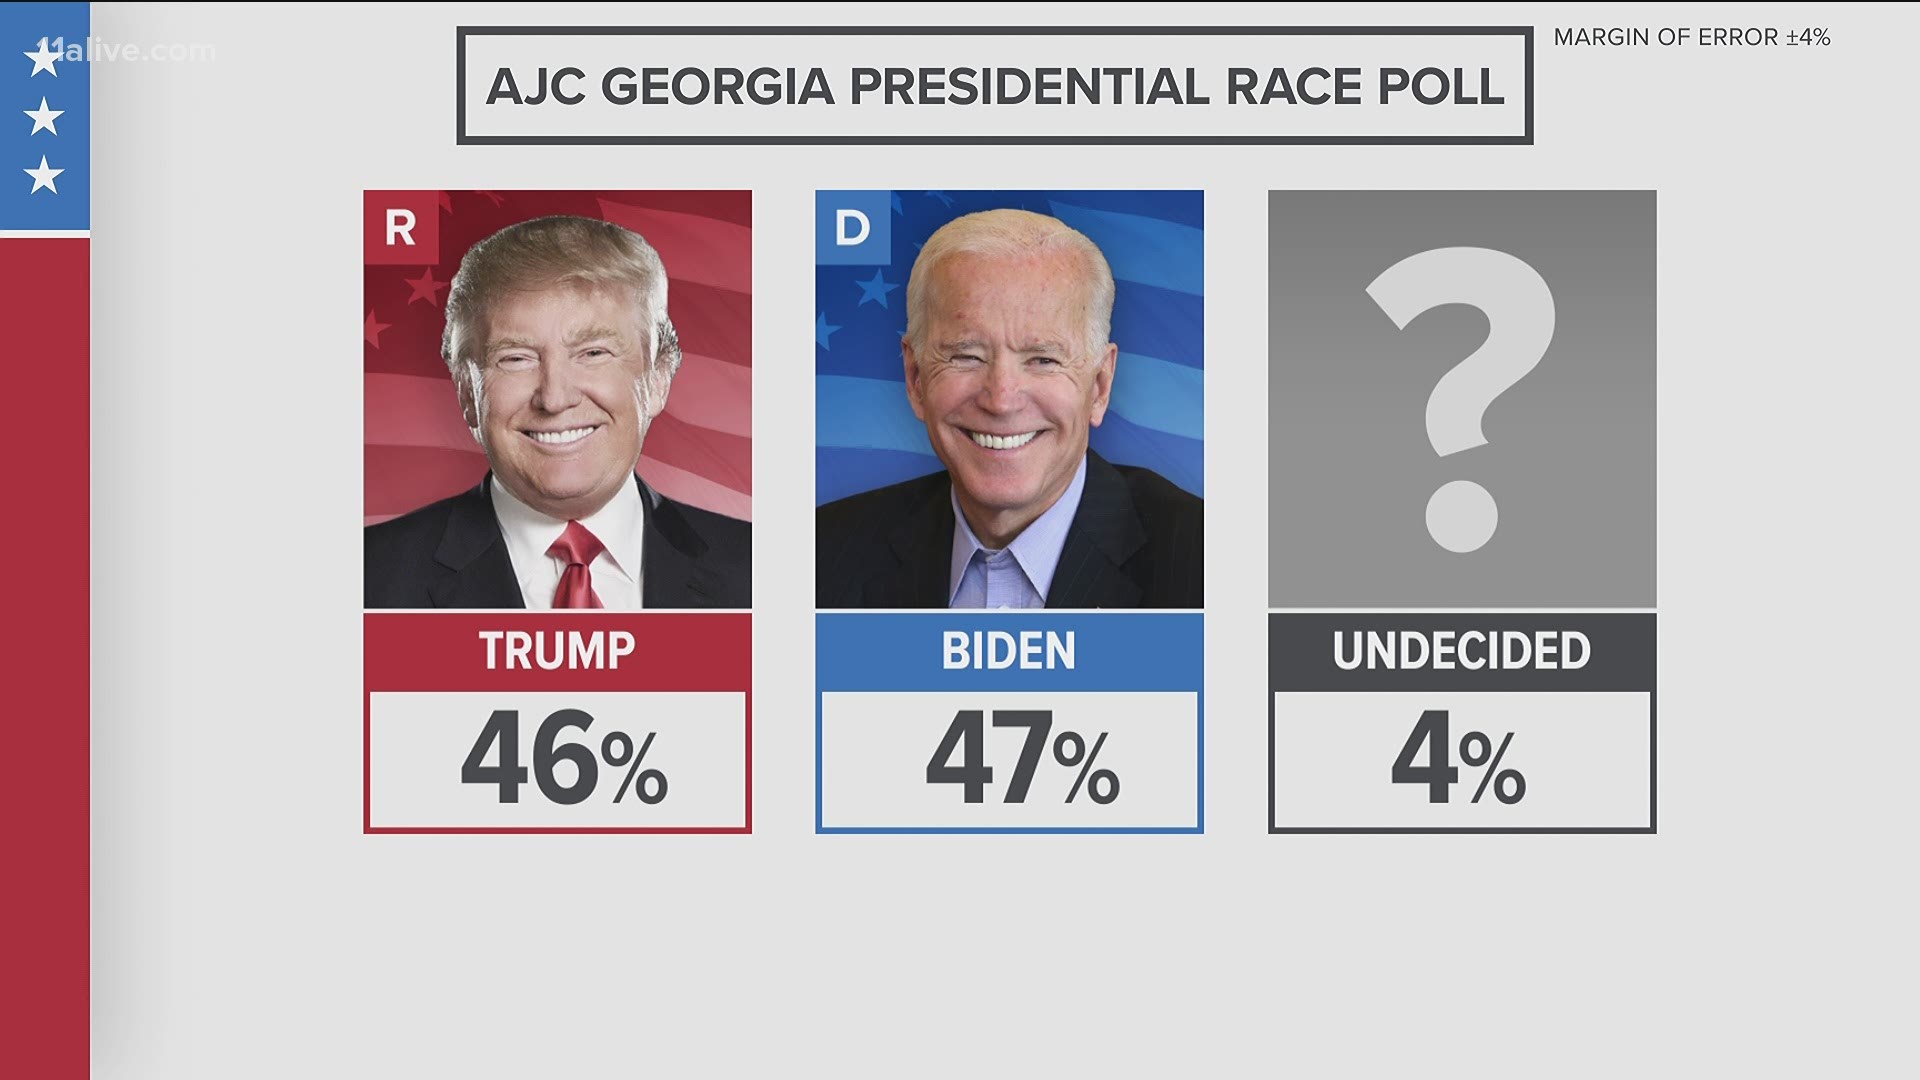 Only four percent said they are undecided.